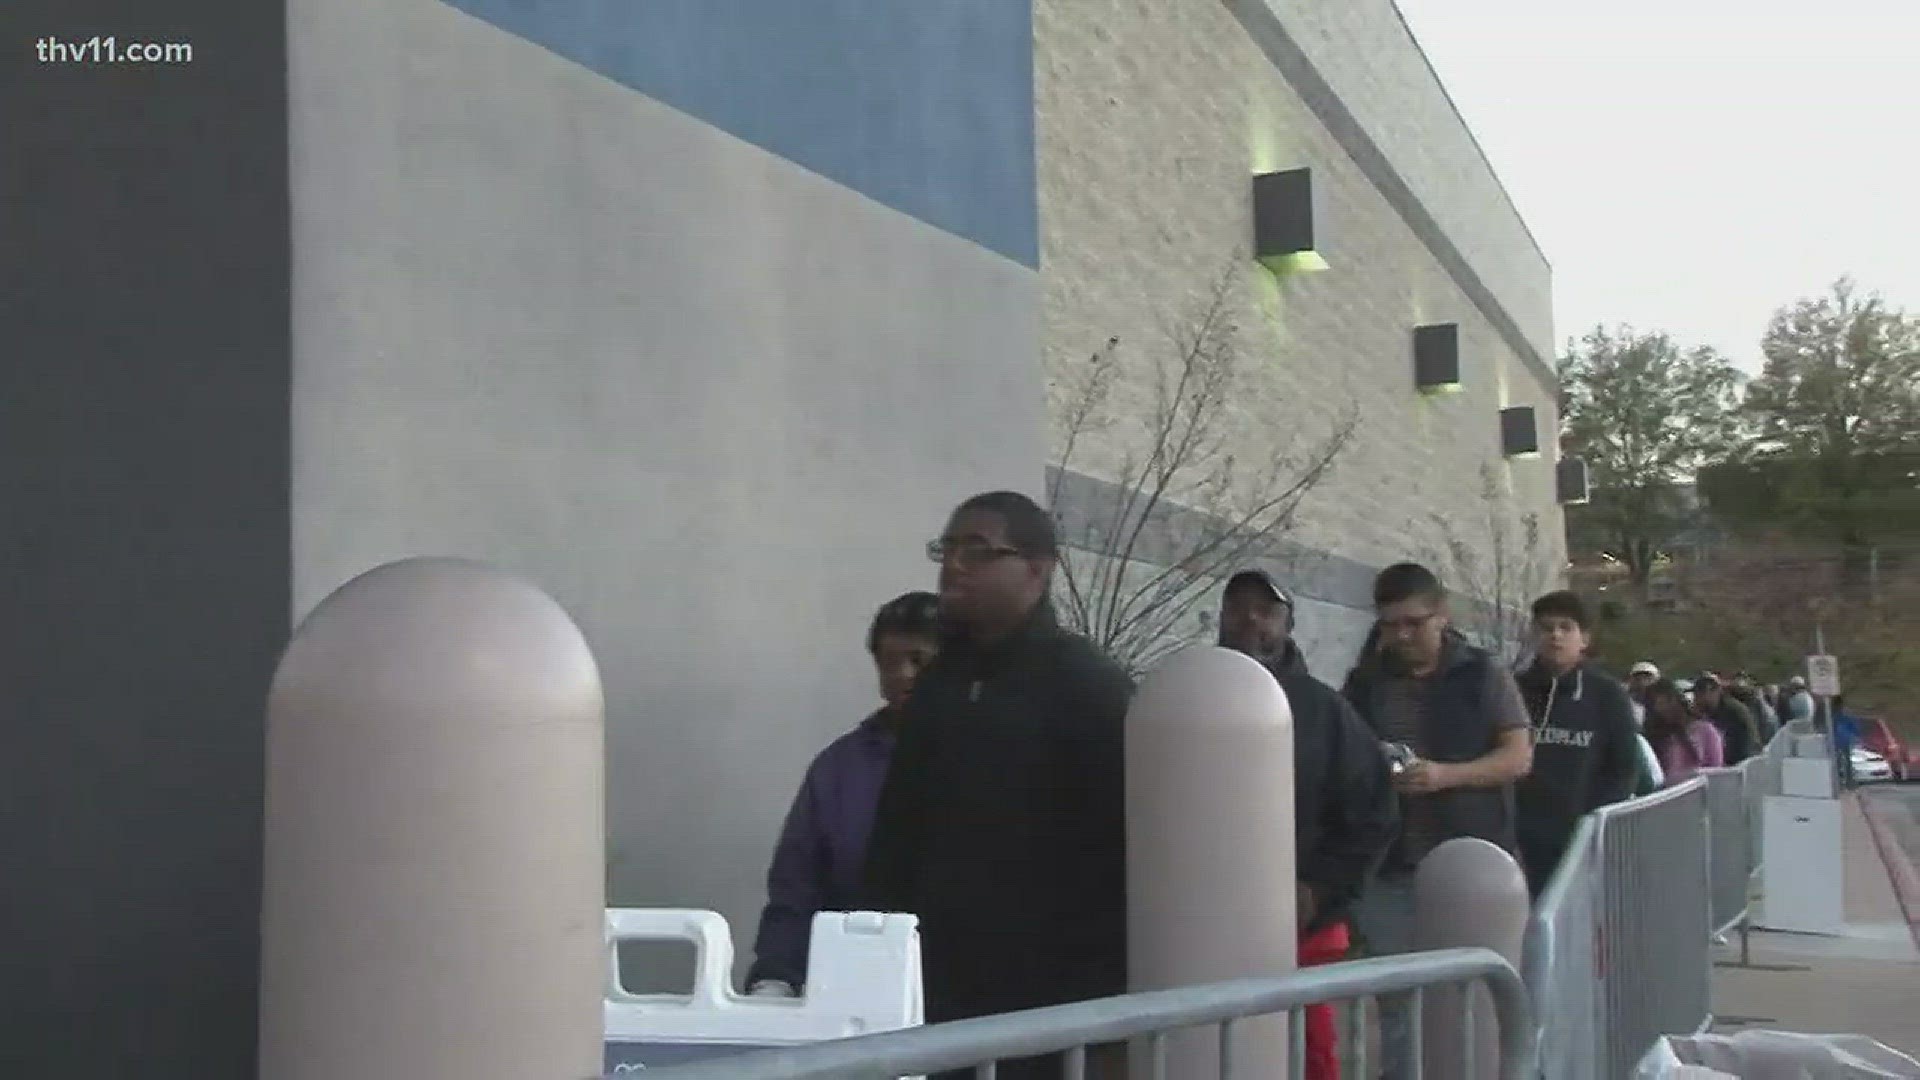 Black Friday deals have gotten many to head out to the stores on the night of Thanksgiving.